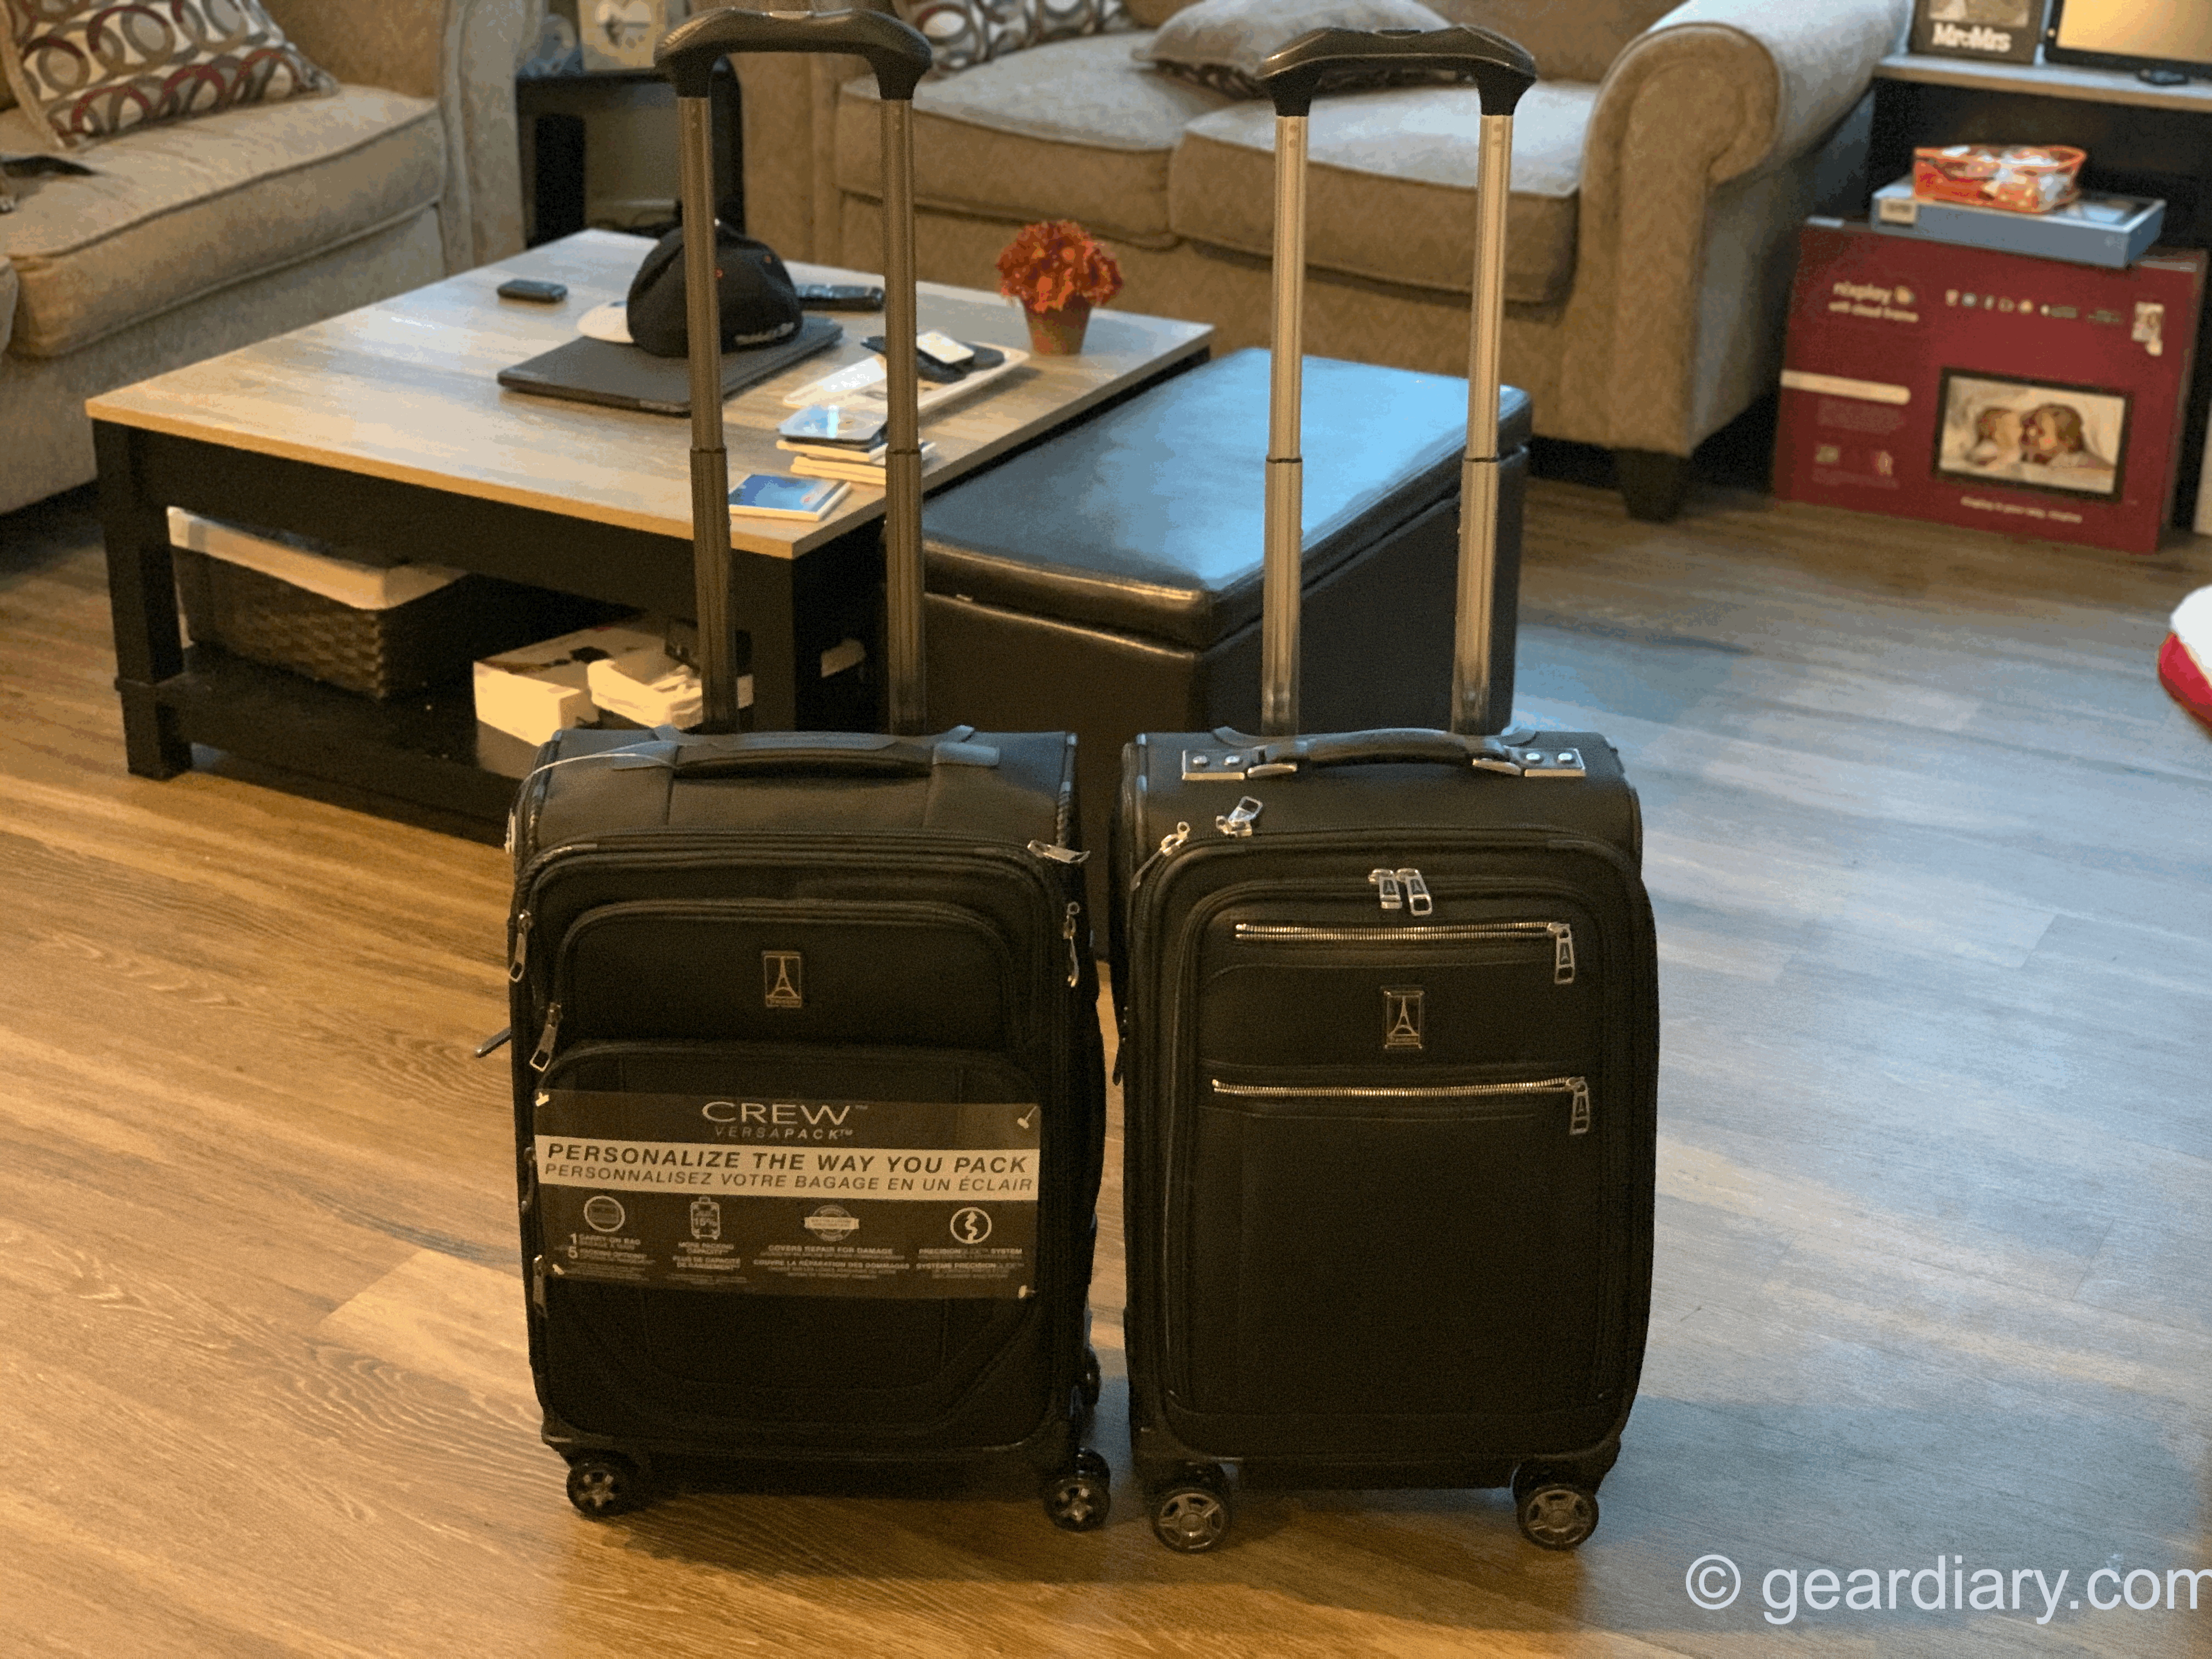 TravelPro's VersaPack Luggage Gives You a Bit More Space in Your